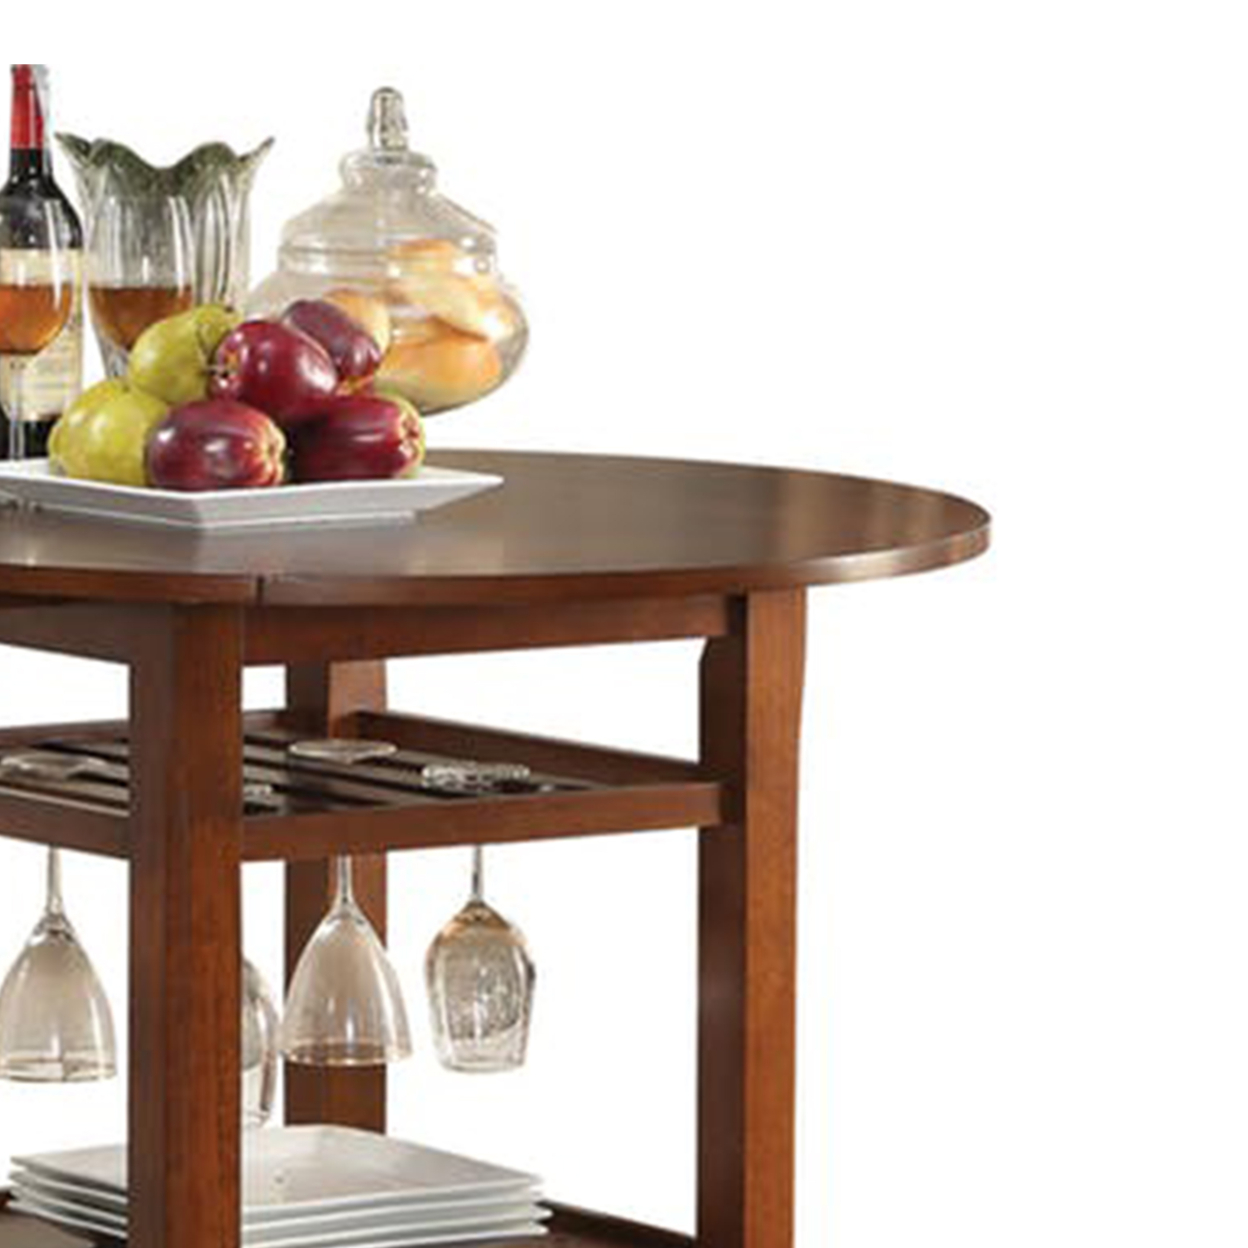 Round Top Wooden Counter Table With Stemware Rack And 2 Drop Leaves, Brown- Saltoro Sherpi